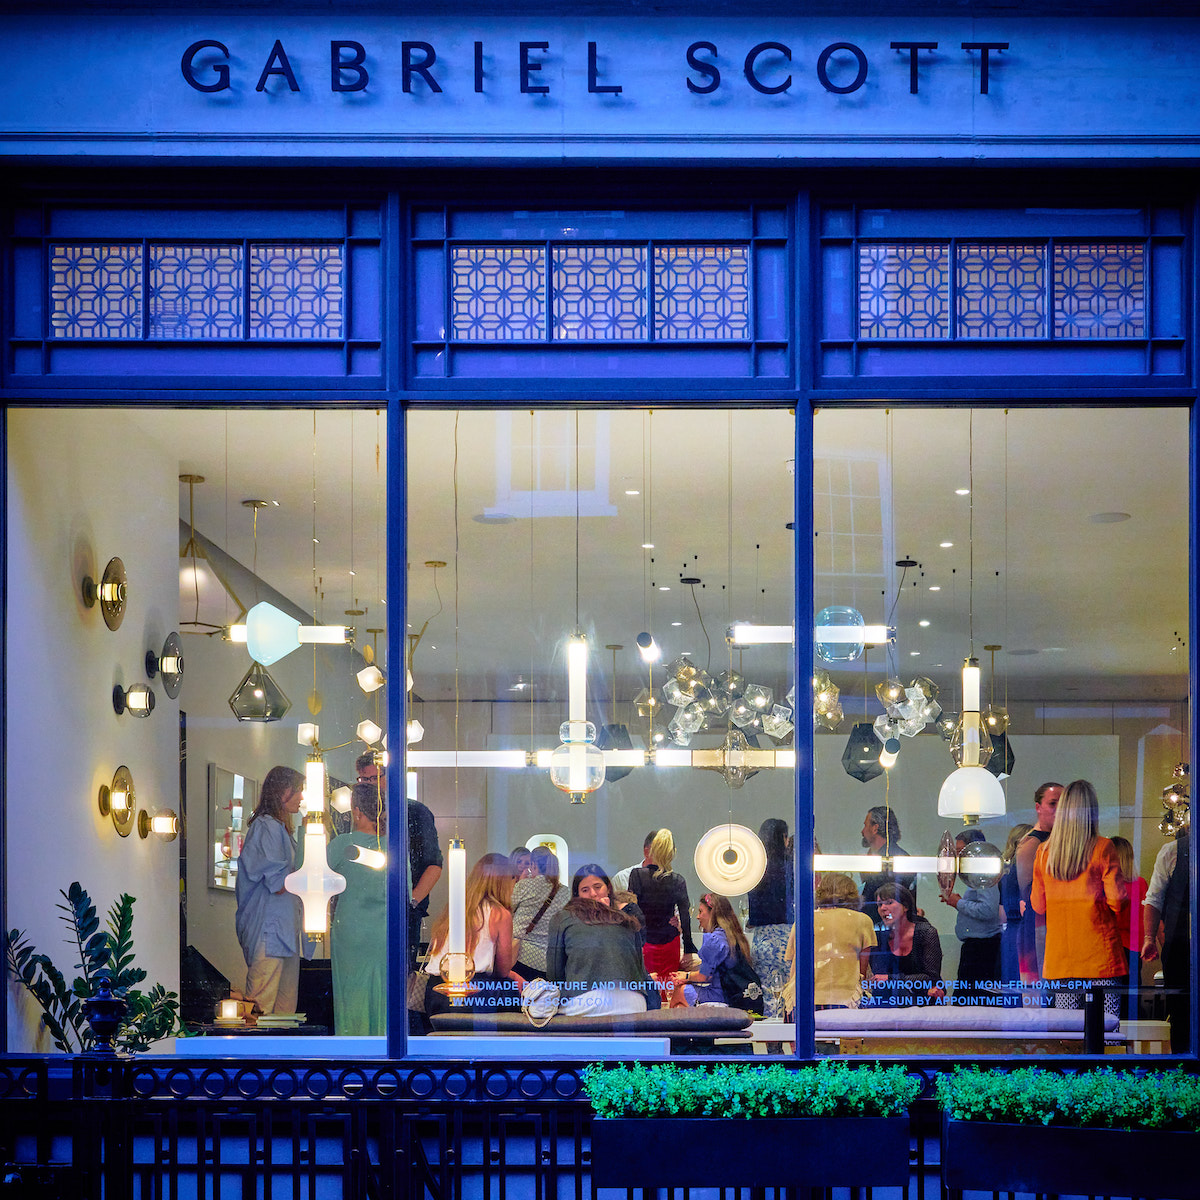 The hotel design community gathered at Gabriel Scott's Mayfair showroom for the panel discussion. | Image credit: Gabriel Scott